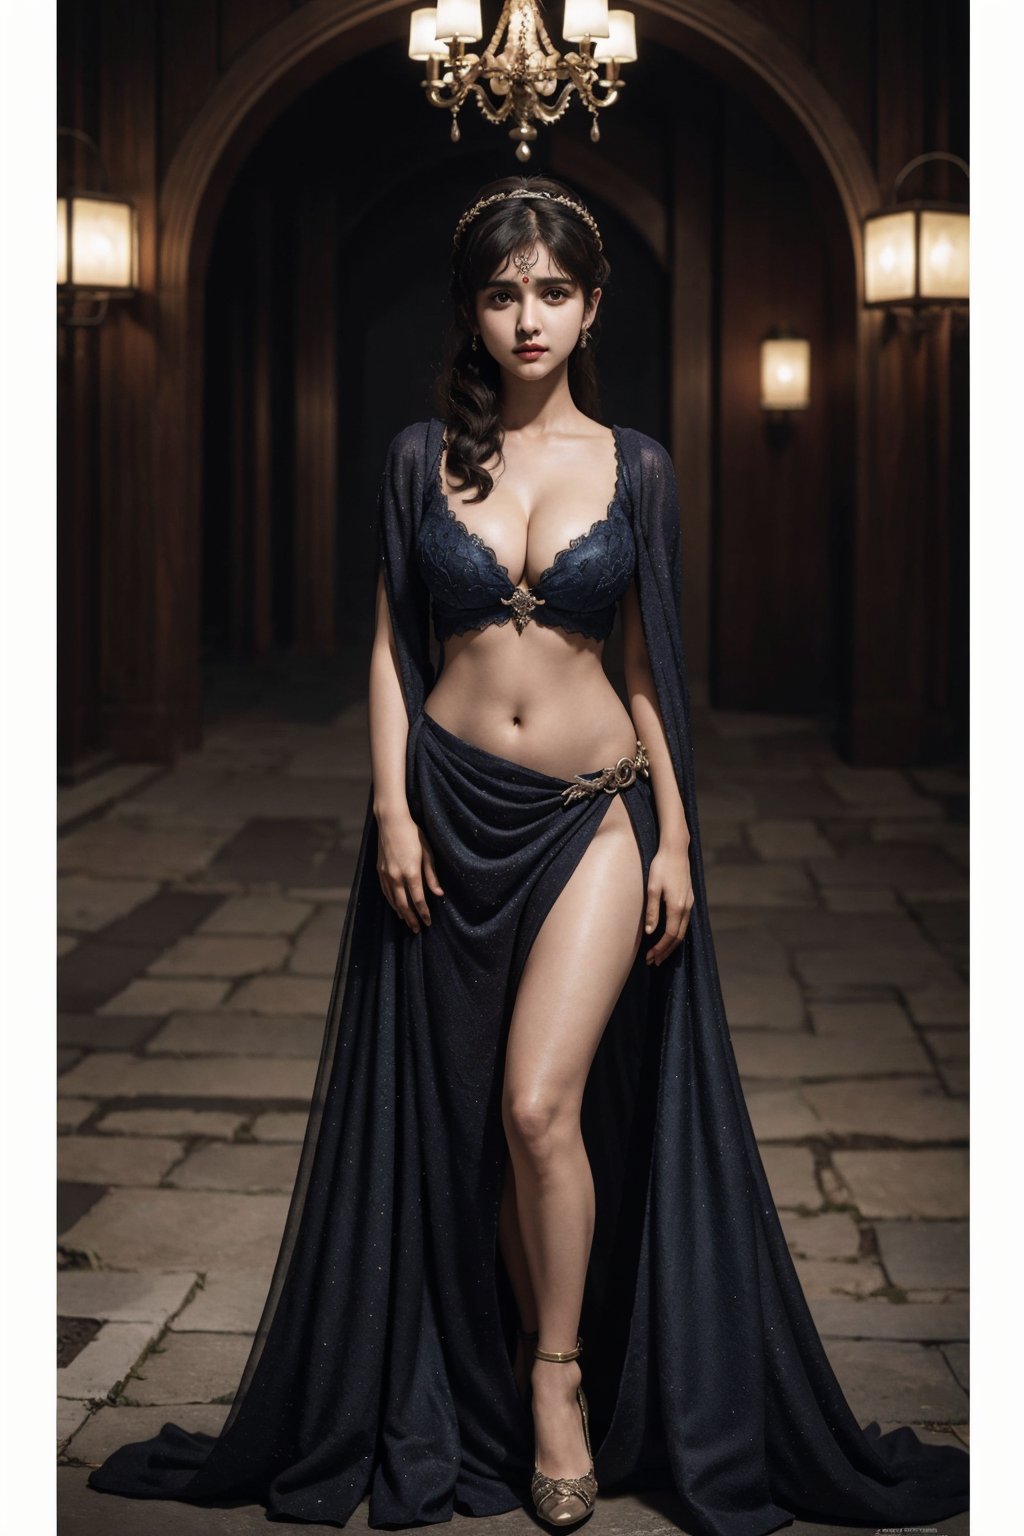 Full body, a Indian model Shirley setia as a game of thrones character ,  detailed face,  deep cleavage,  navel,  clear face,  Portrait, cinematic shot of game of thrones,  game of thrones dress, dragons in the background 